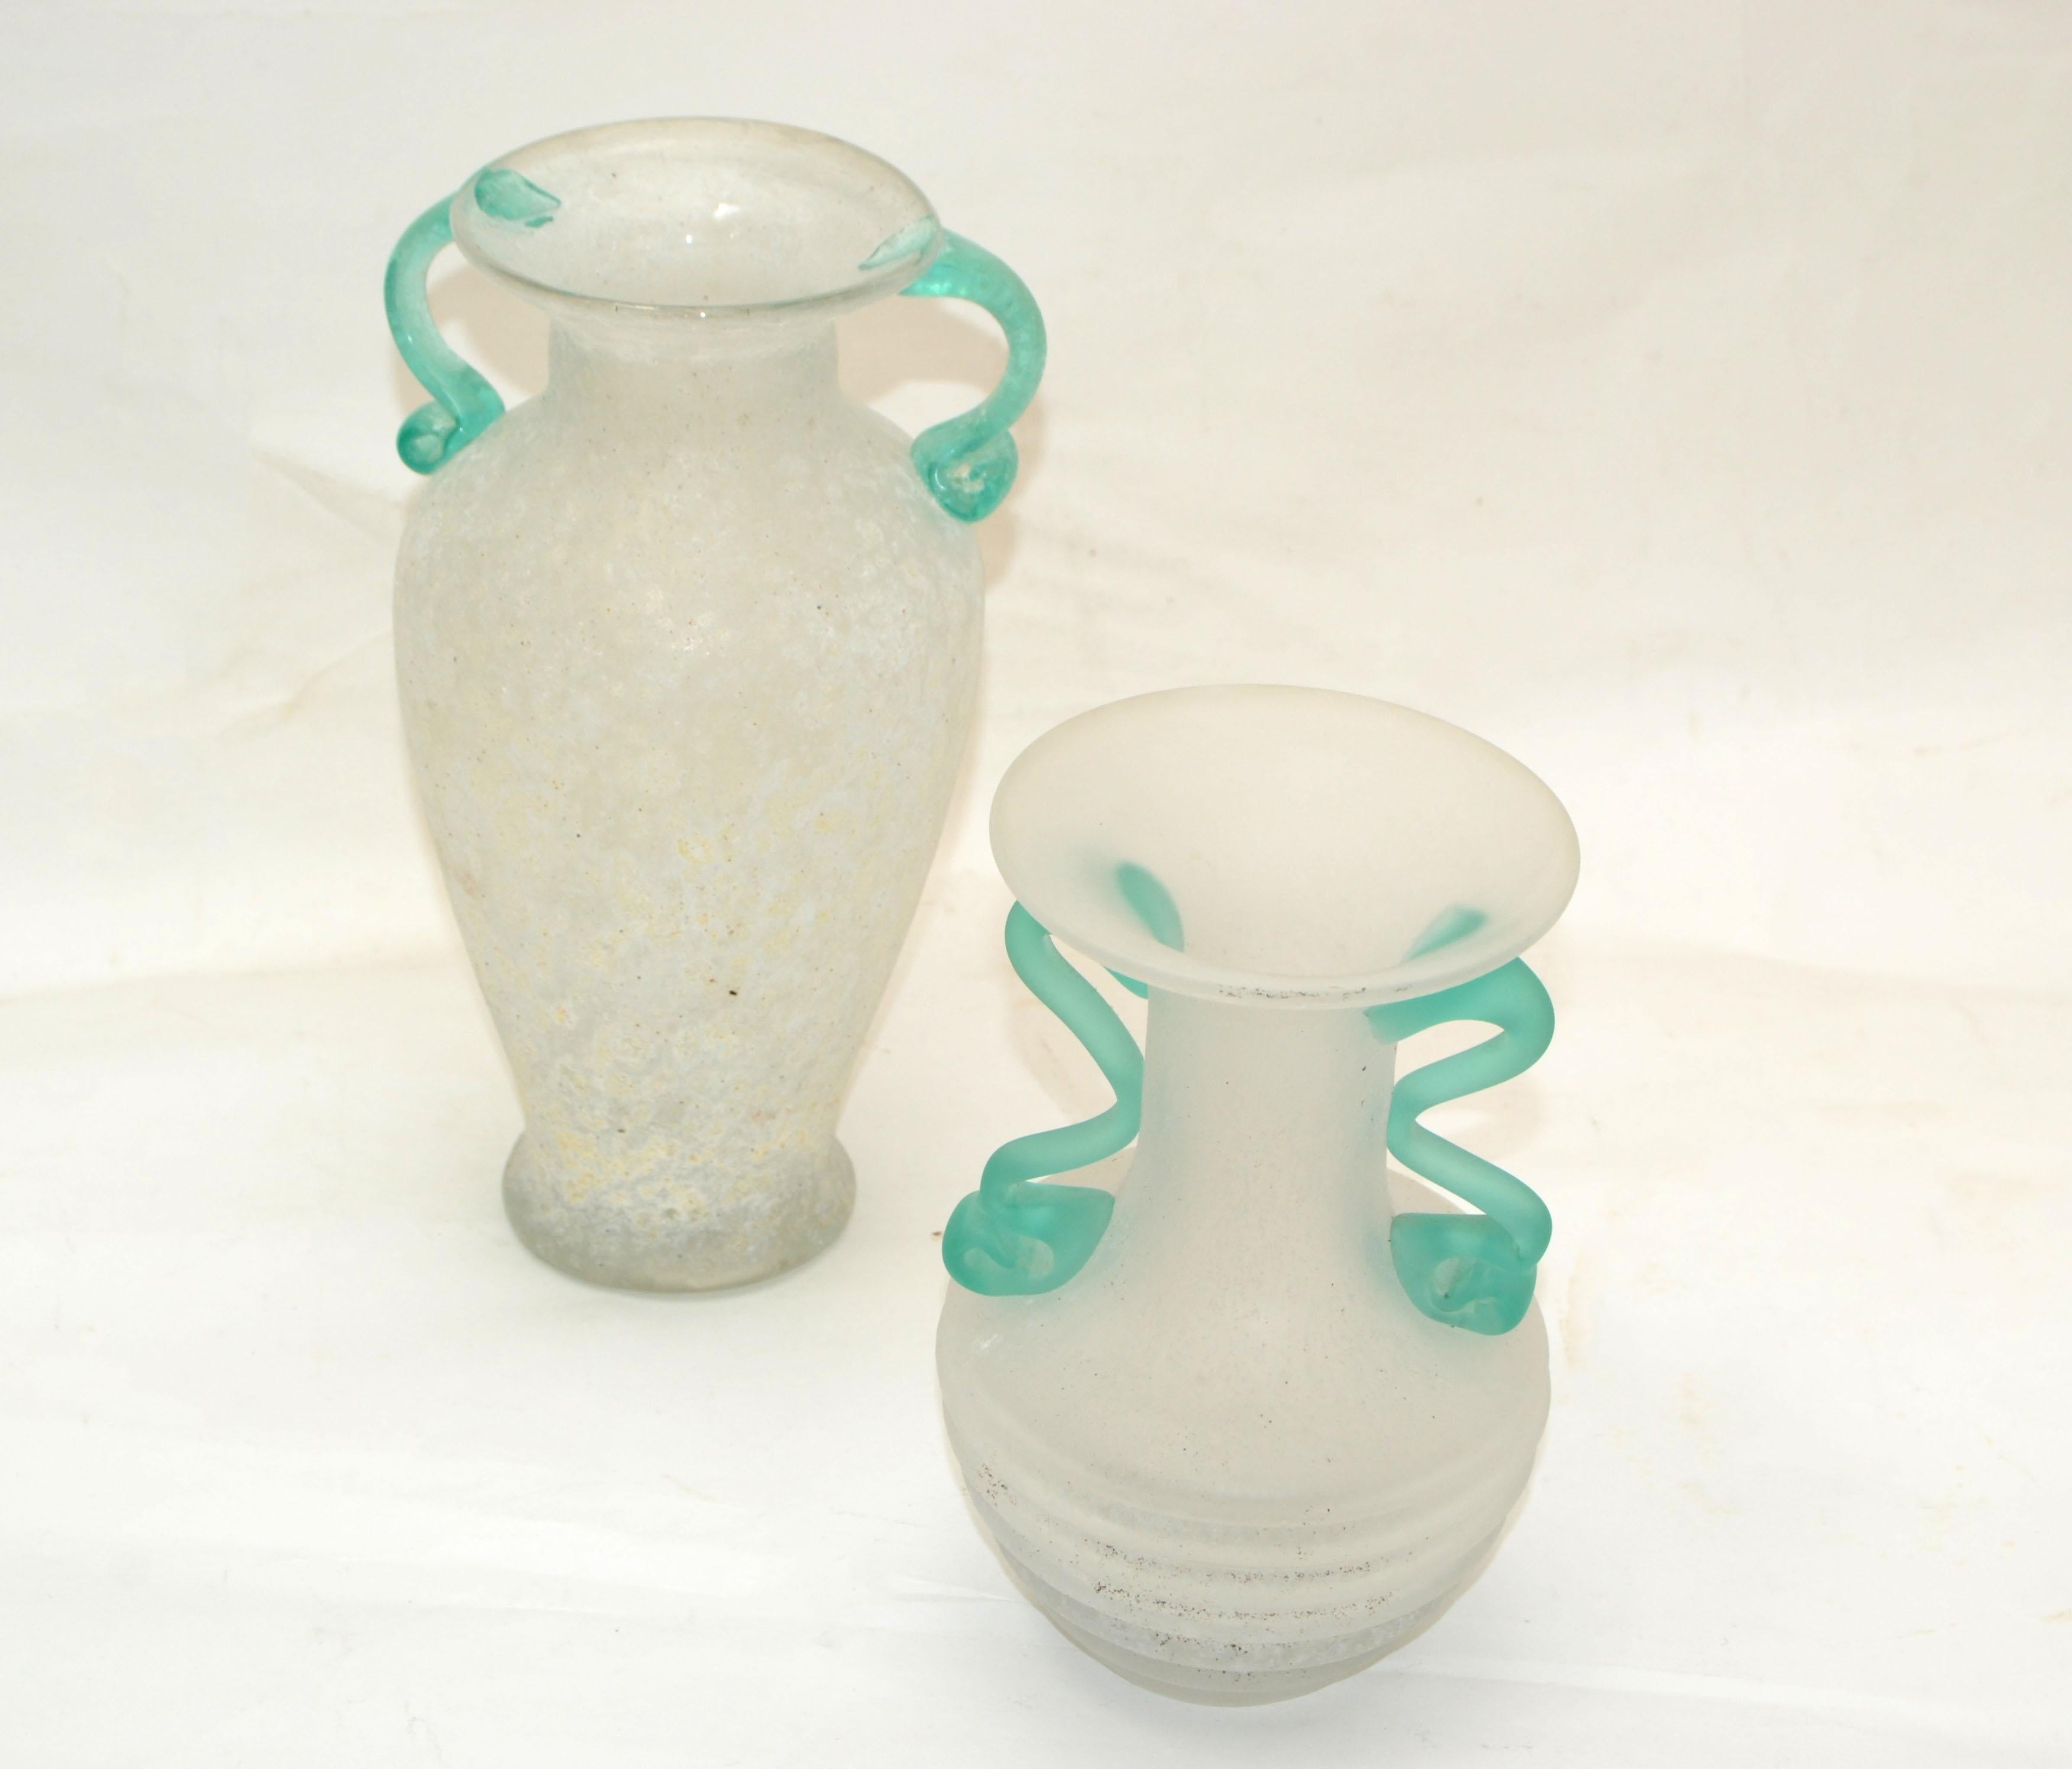 Set of 2 white & mint green scavo glass Murano Art glass bud vases, vessel, decanter Mid-Century Modern made in Italy in 1980.
Smaller Vase measures: 6.5 inches Height.